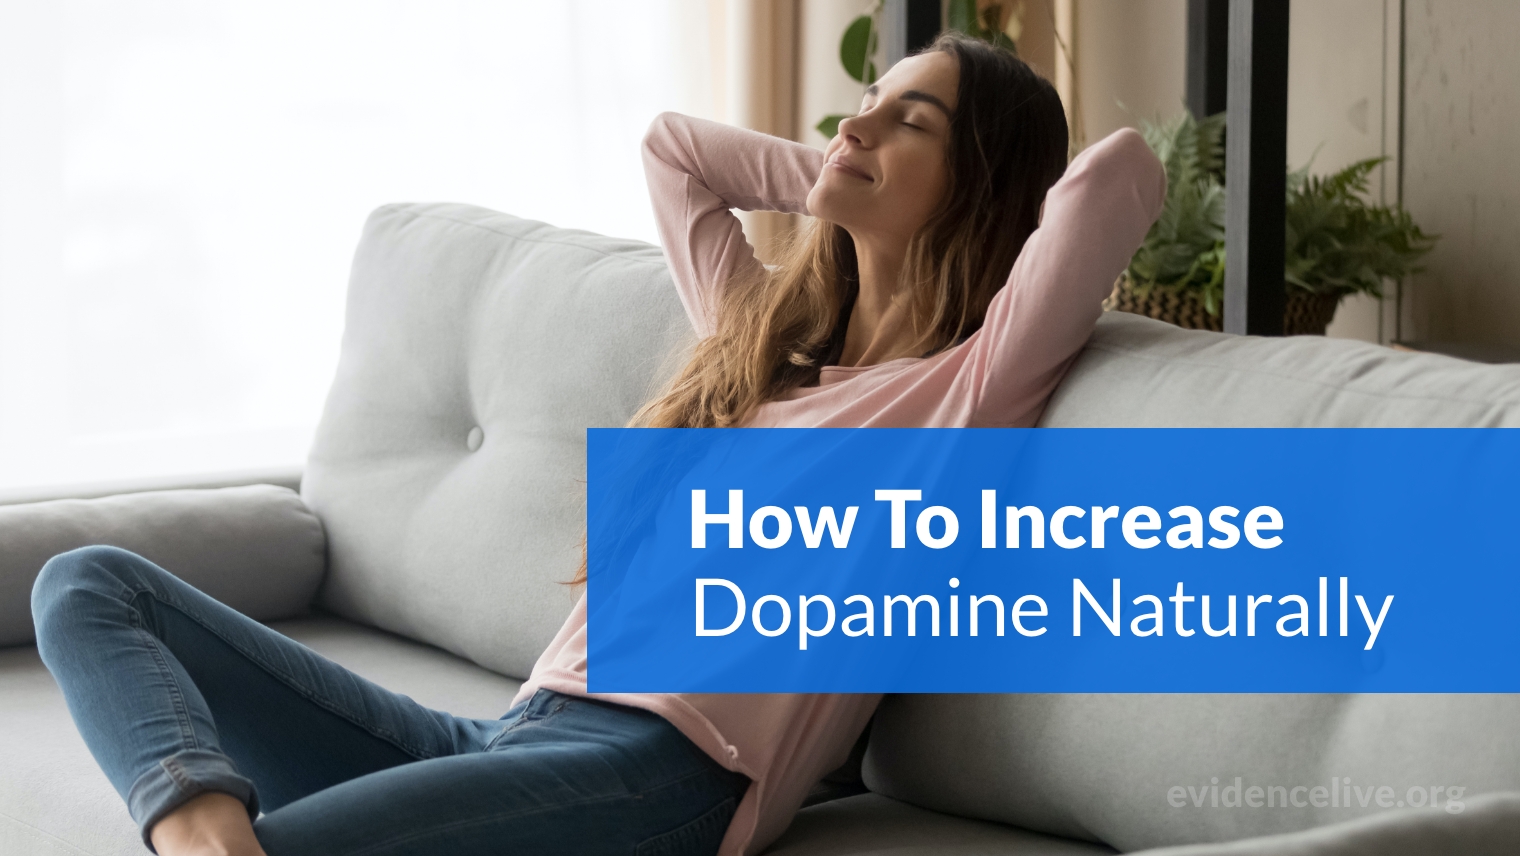 How To Increase Dopamine Naturally